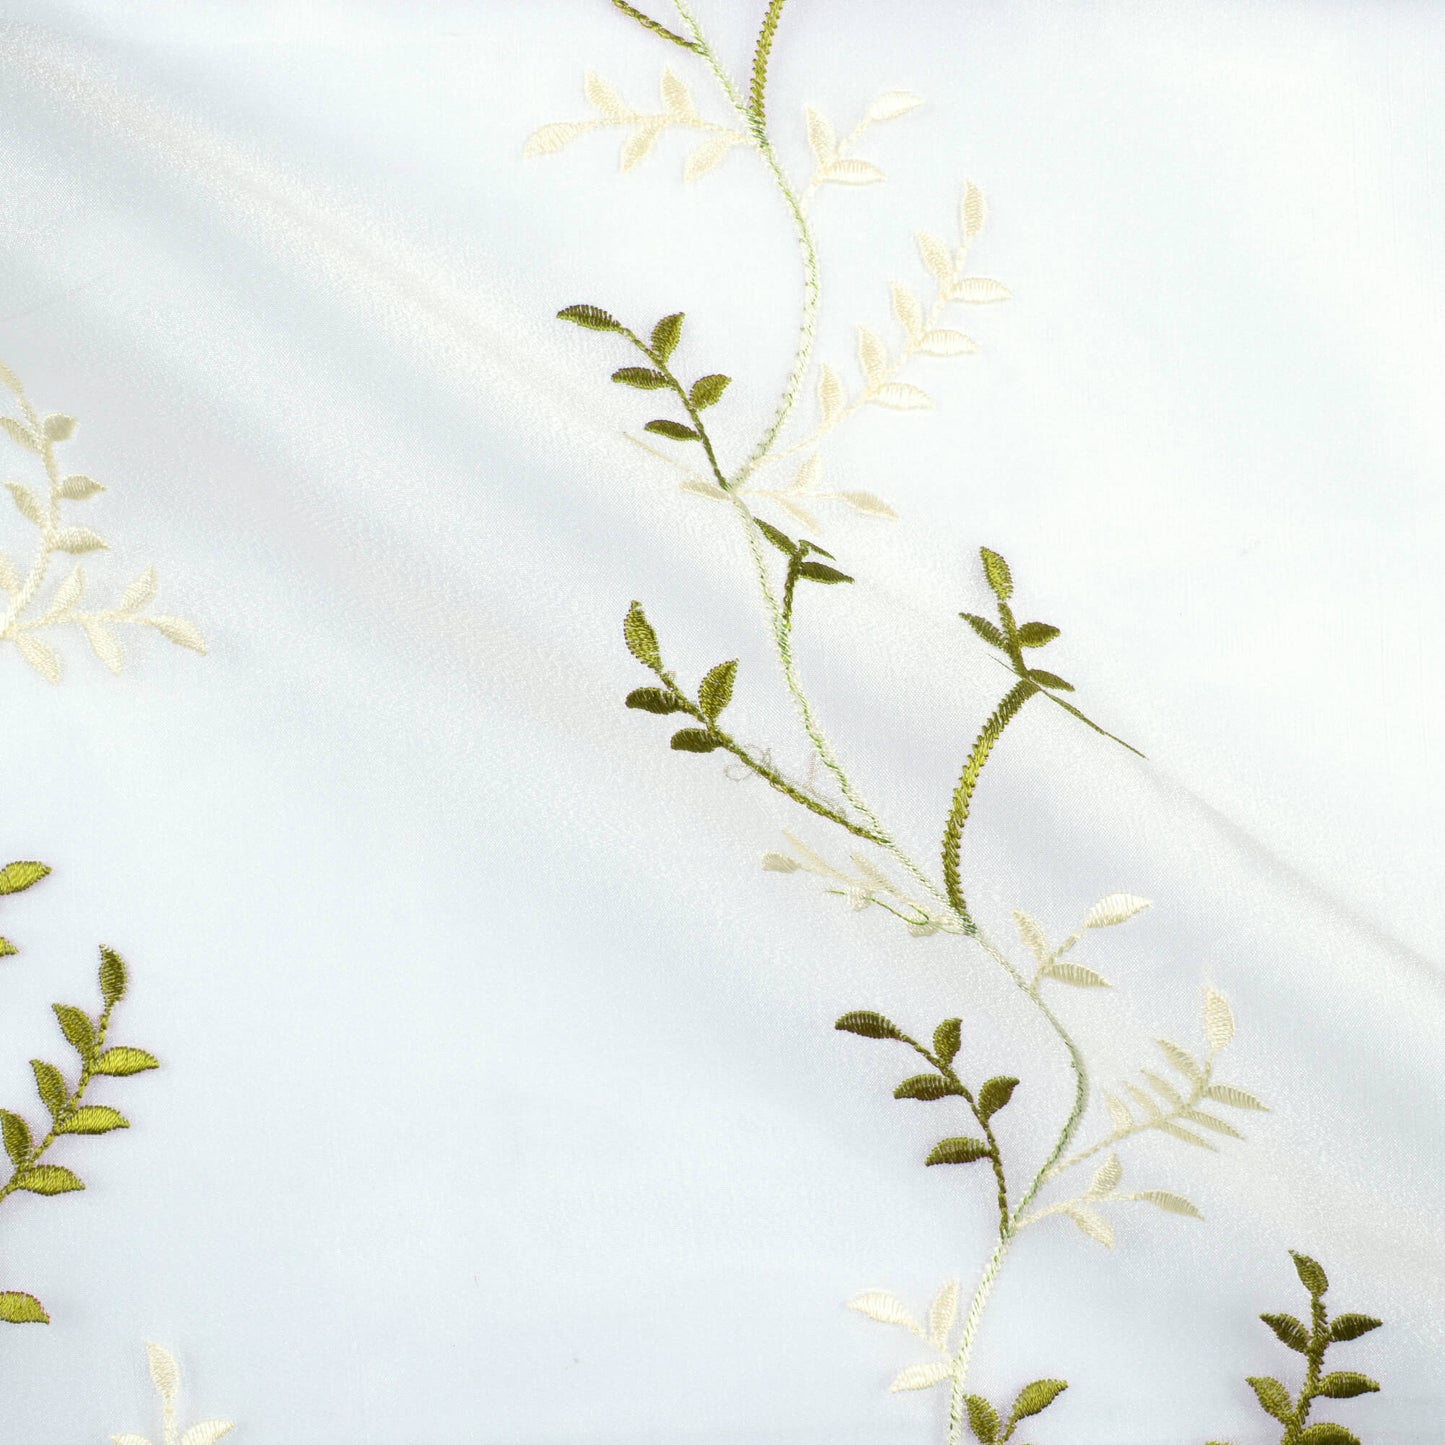 Off White And Parrot Green Embroidery Organza Tissue Premium Sheer Fabric (Width 48 Inches)